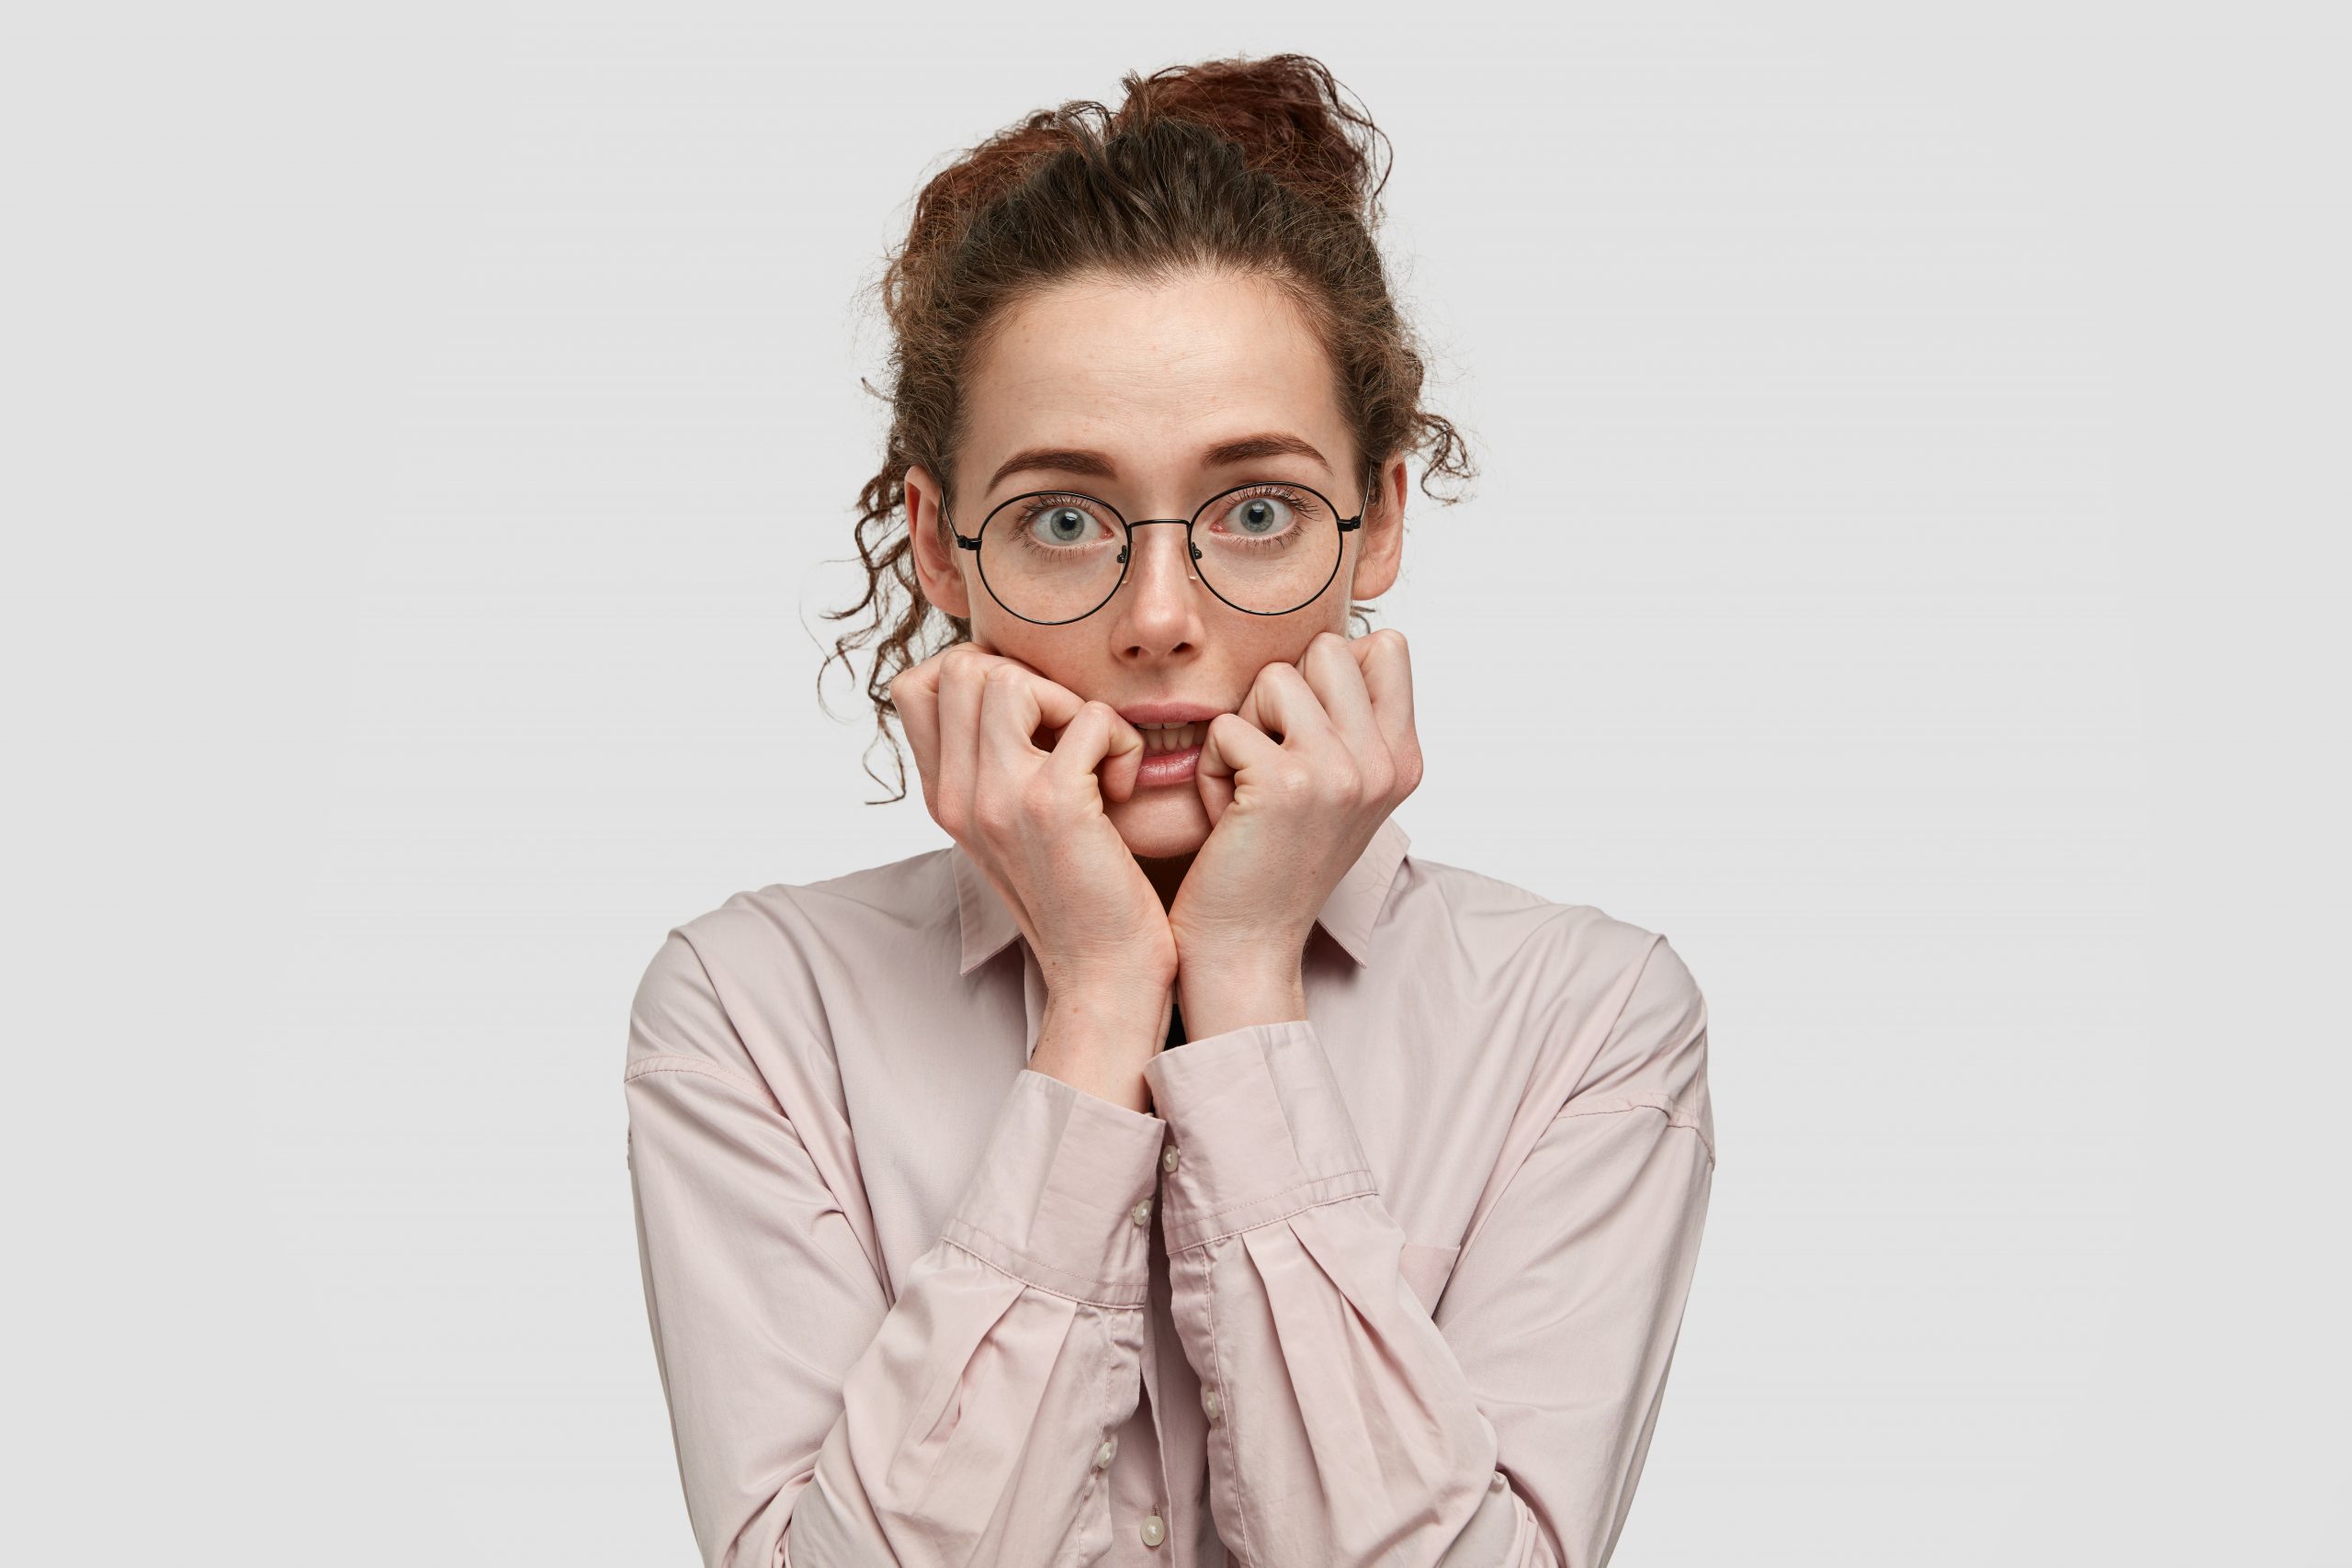 unhappy-nervous-young-female-with-worried-expression-bites-finger-nails-looks-anxiously-directly-at-camera-wears-spectacles-dressed-in-fashionable-clothes-stands-against-white-background